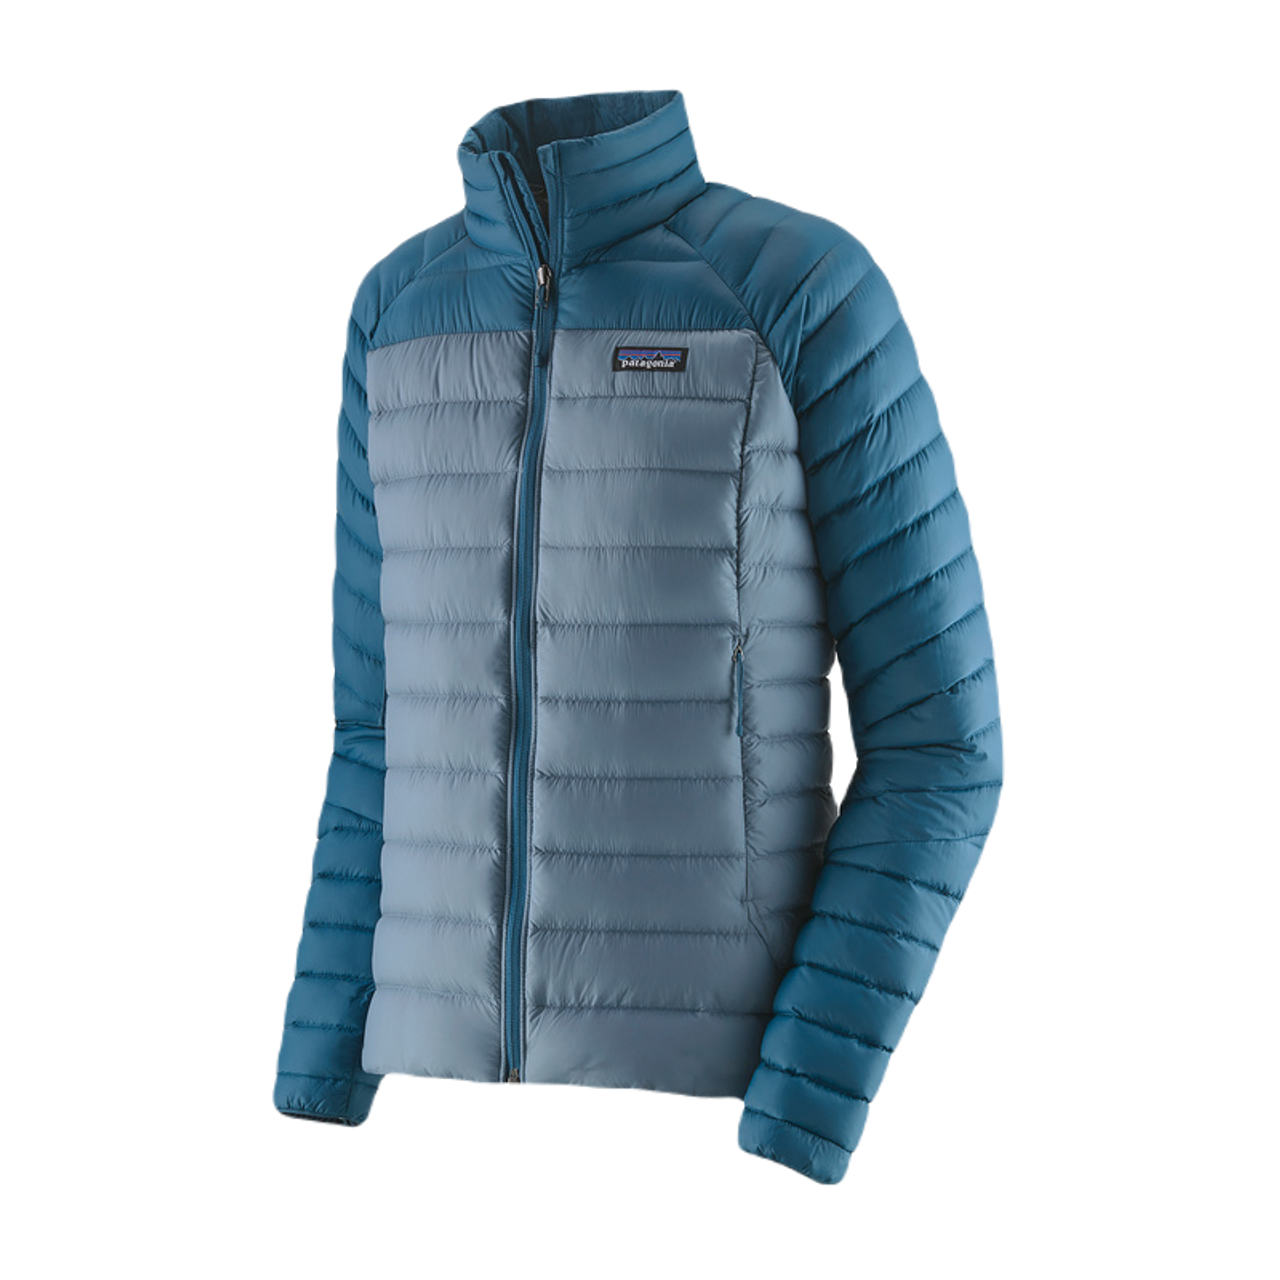 Patagonia Women's Jackets for sale in Levelock, Alaska